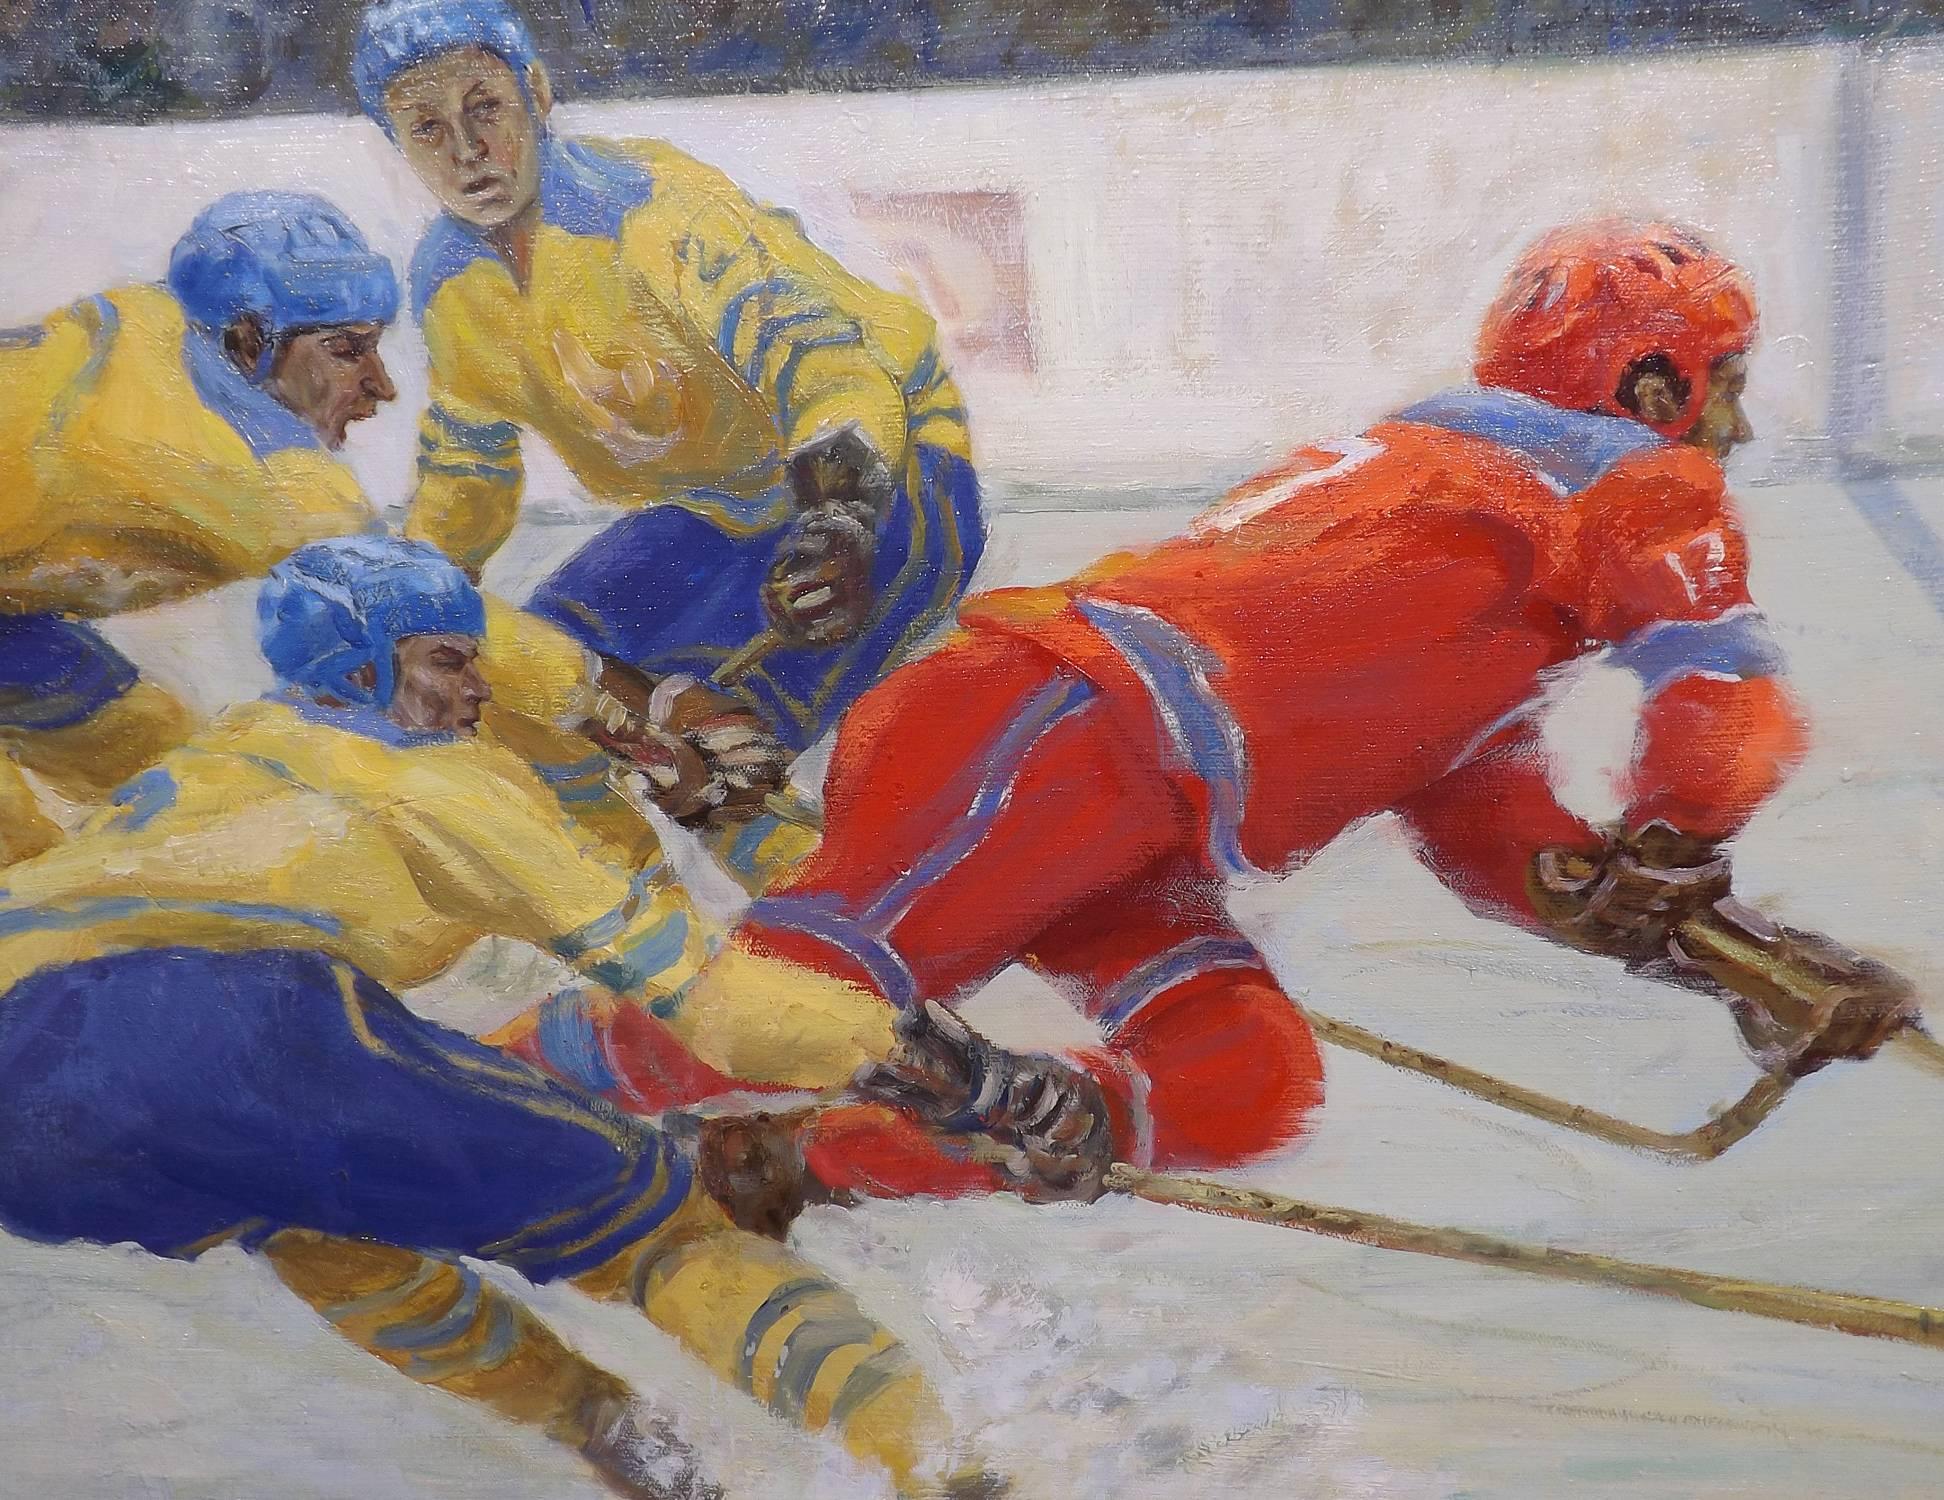 This painting by Nikolai Vassilievich Ovchinnikov (1918-2004) of the Soviet Union playing Sweden. In the 1973 the Soviet hockey team won the World Championship over Sweden which was played in Moscow.

Number 17 of the Soviet team with the puck is